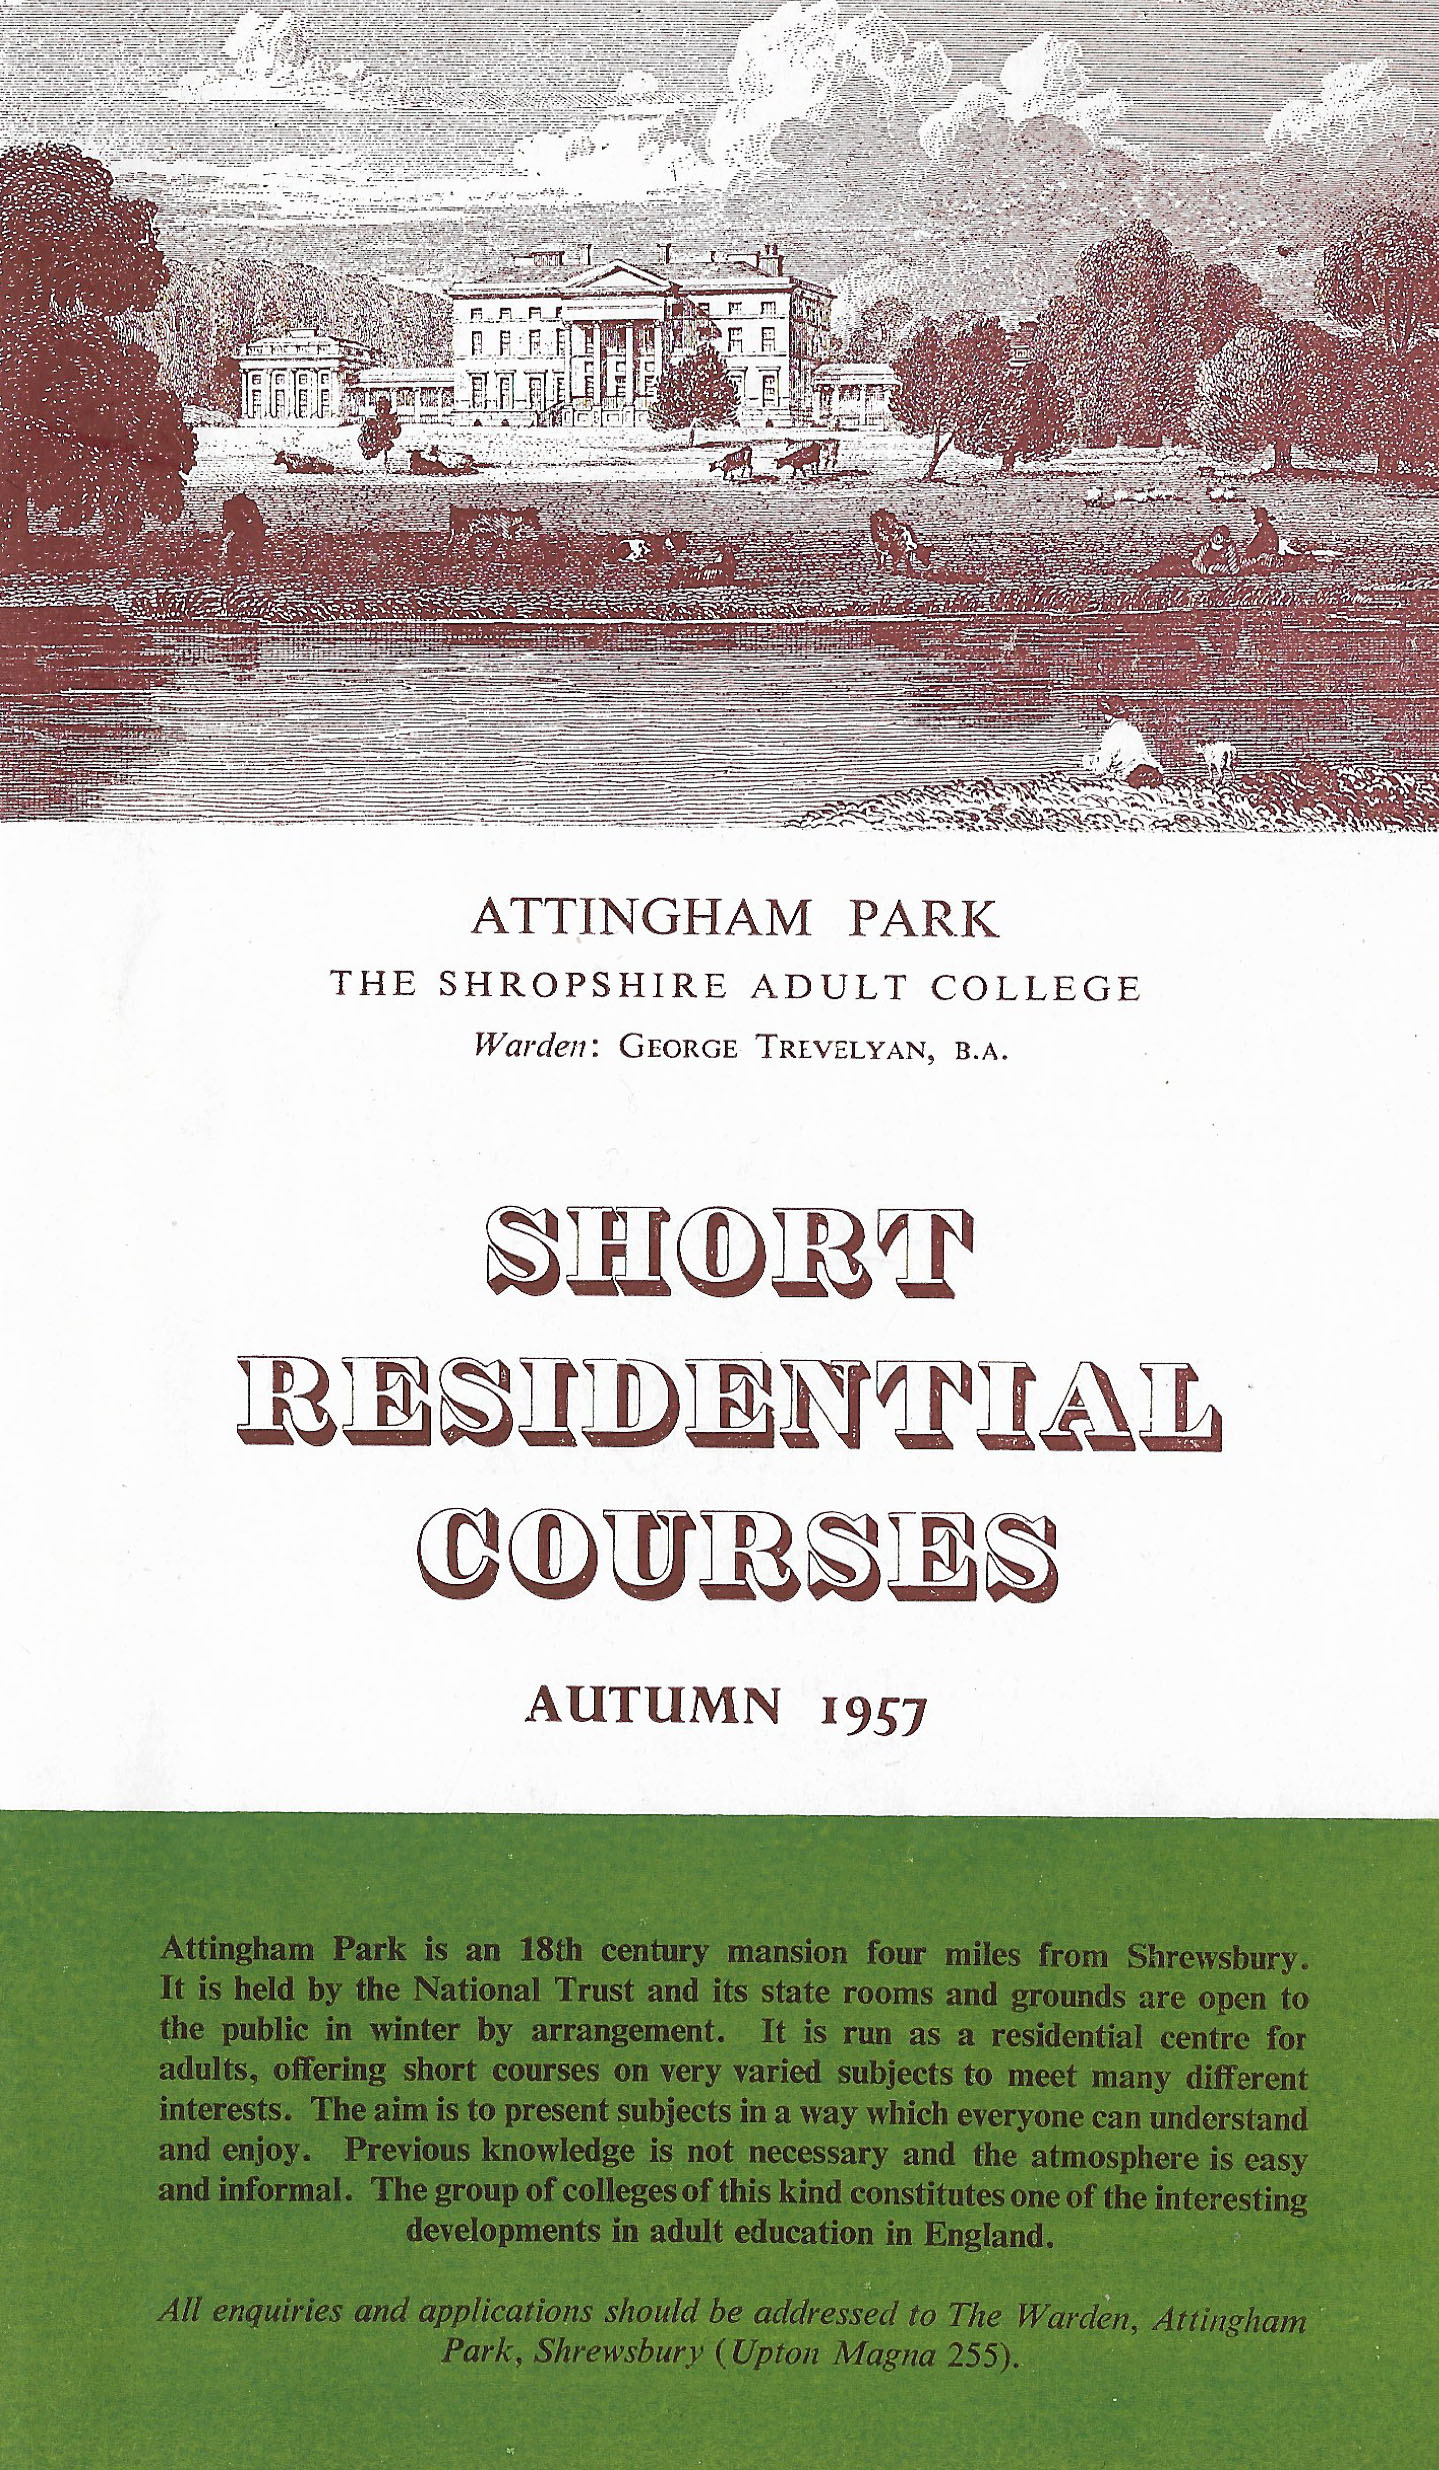 1957 course_front.jpg